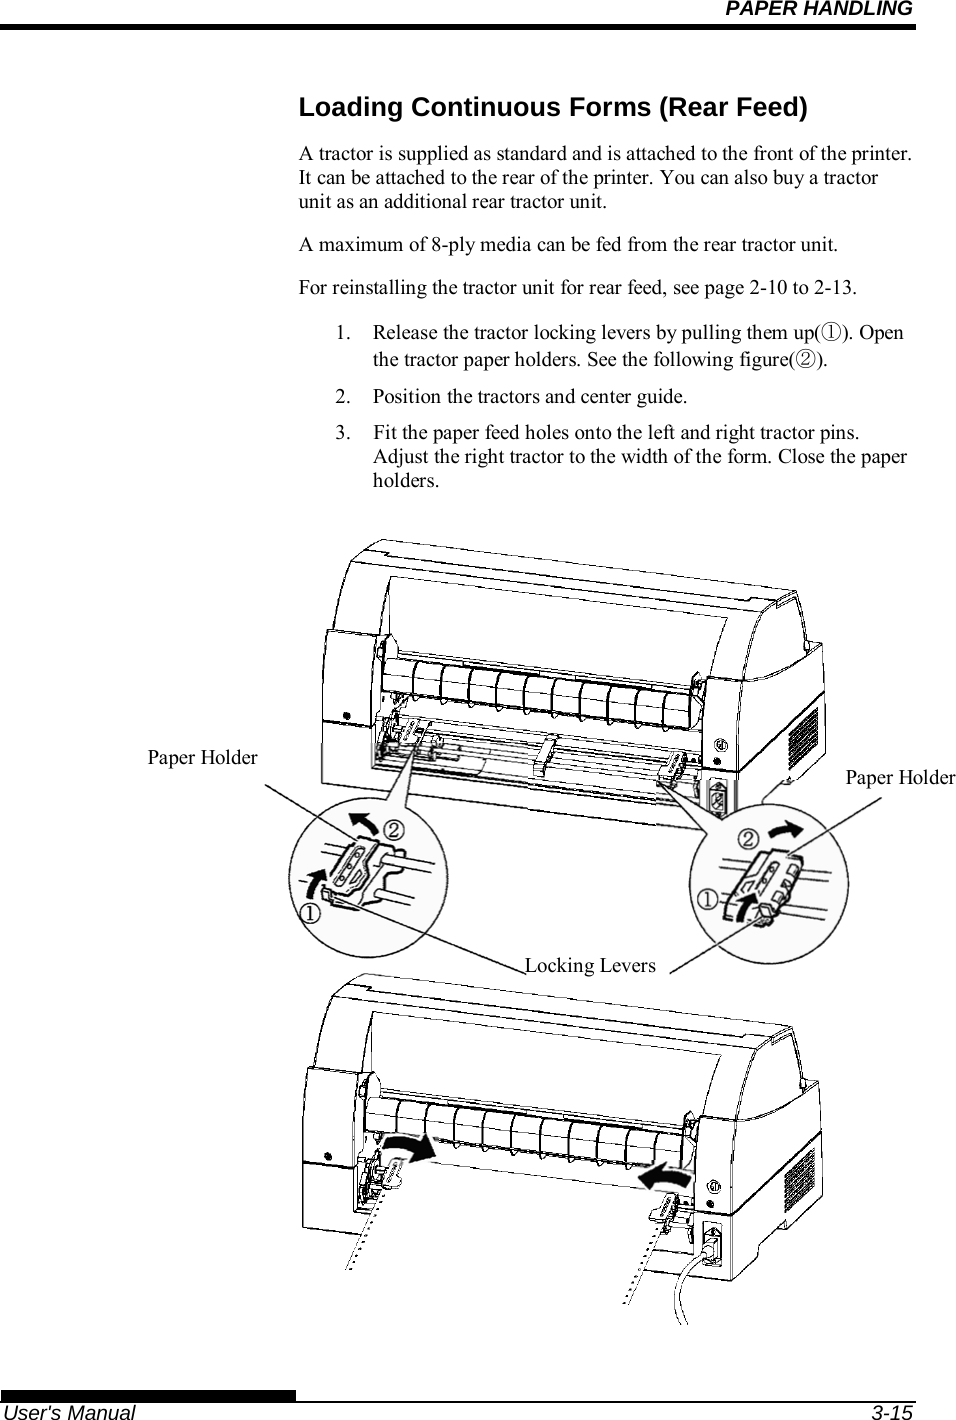 PAPER HANDLING   User&apos;s Manual  3-15 Loading Continuous Forms (Rear Feed) A tractor is supplied as standard and is attached to the front of the printer. It can be attached to the rear of the printer. You can also buy a tractor unit as an additional rear tractor unit. A maximum of 8-ply media can be fed from the rear tractor unit. For reinstalling the tractor unit for rear feed, see page 2-10 to 2-13. 1.  Release the tractor locking levers by pulling them up(①). Open the tractor paper holders. See the following figure(②). 2.  Position the tractors and center guide. 3.    Fit the paper feed holes onto the left and right tractor pins.  Adjust the right tractor to the width of the form. Close the paper holders.                            Locking Levers Paper Holder  Paper Holder 